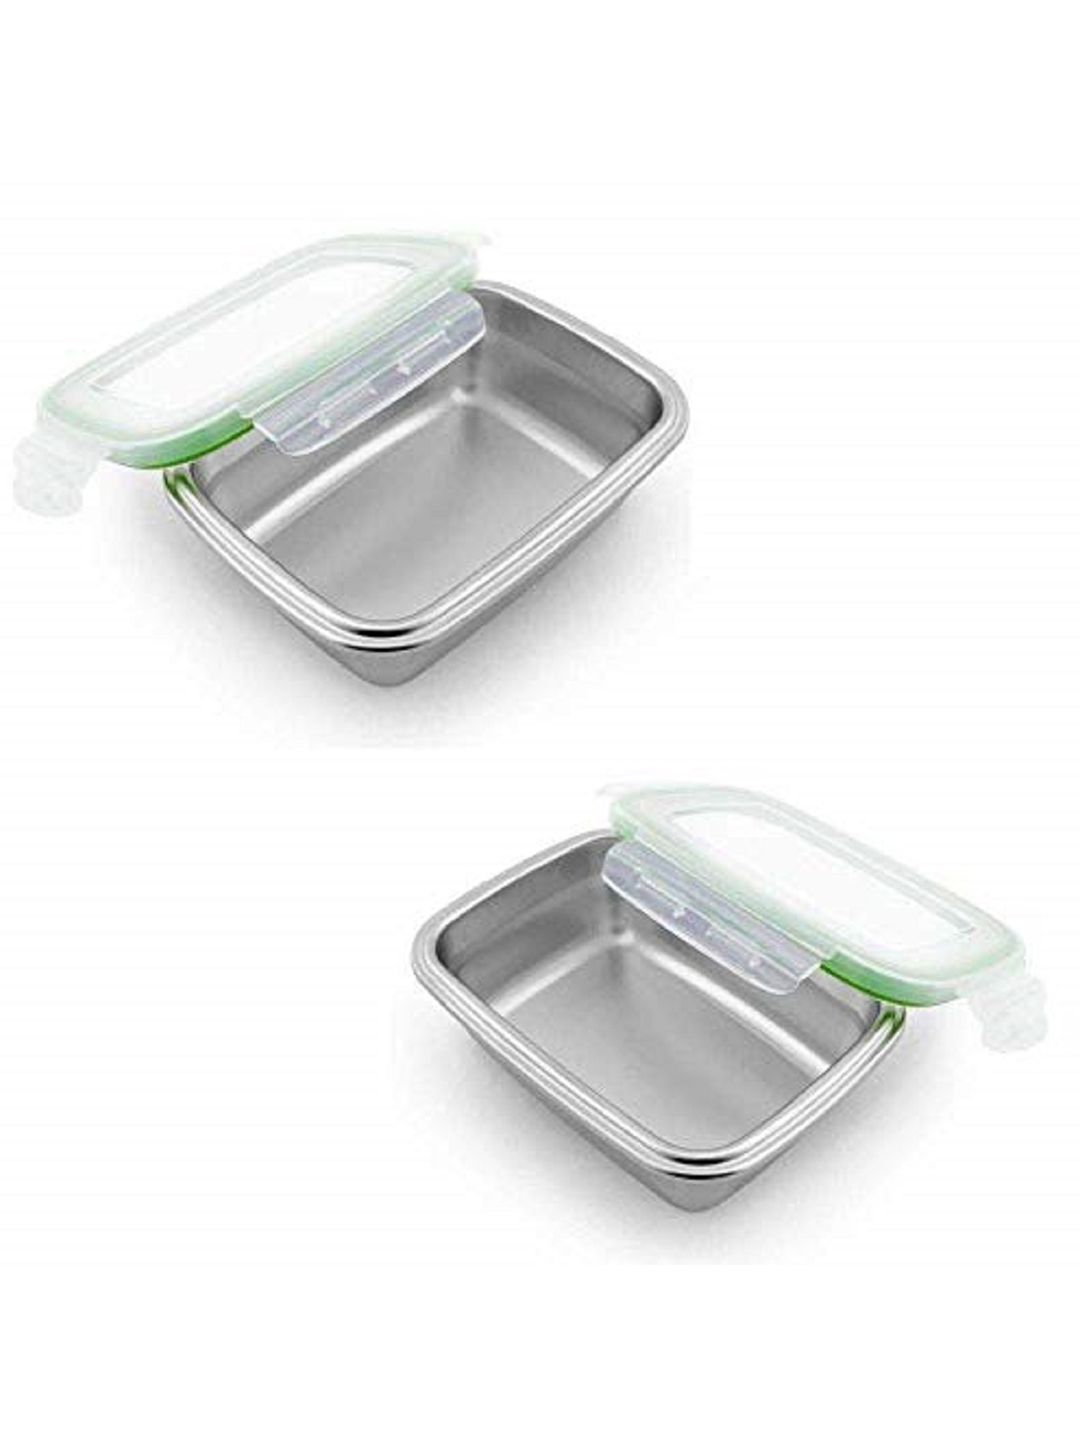 Femora Set Of 2 Silver-Toned & Green Stainless Steel Storage Containers Price in India